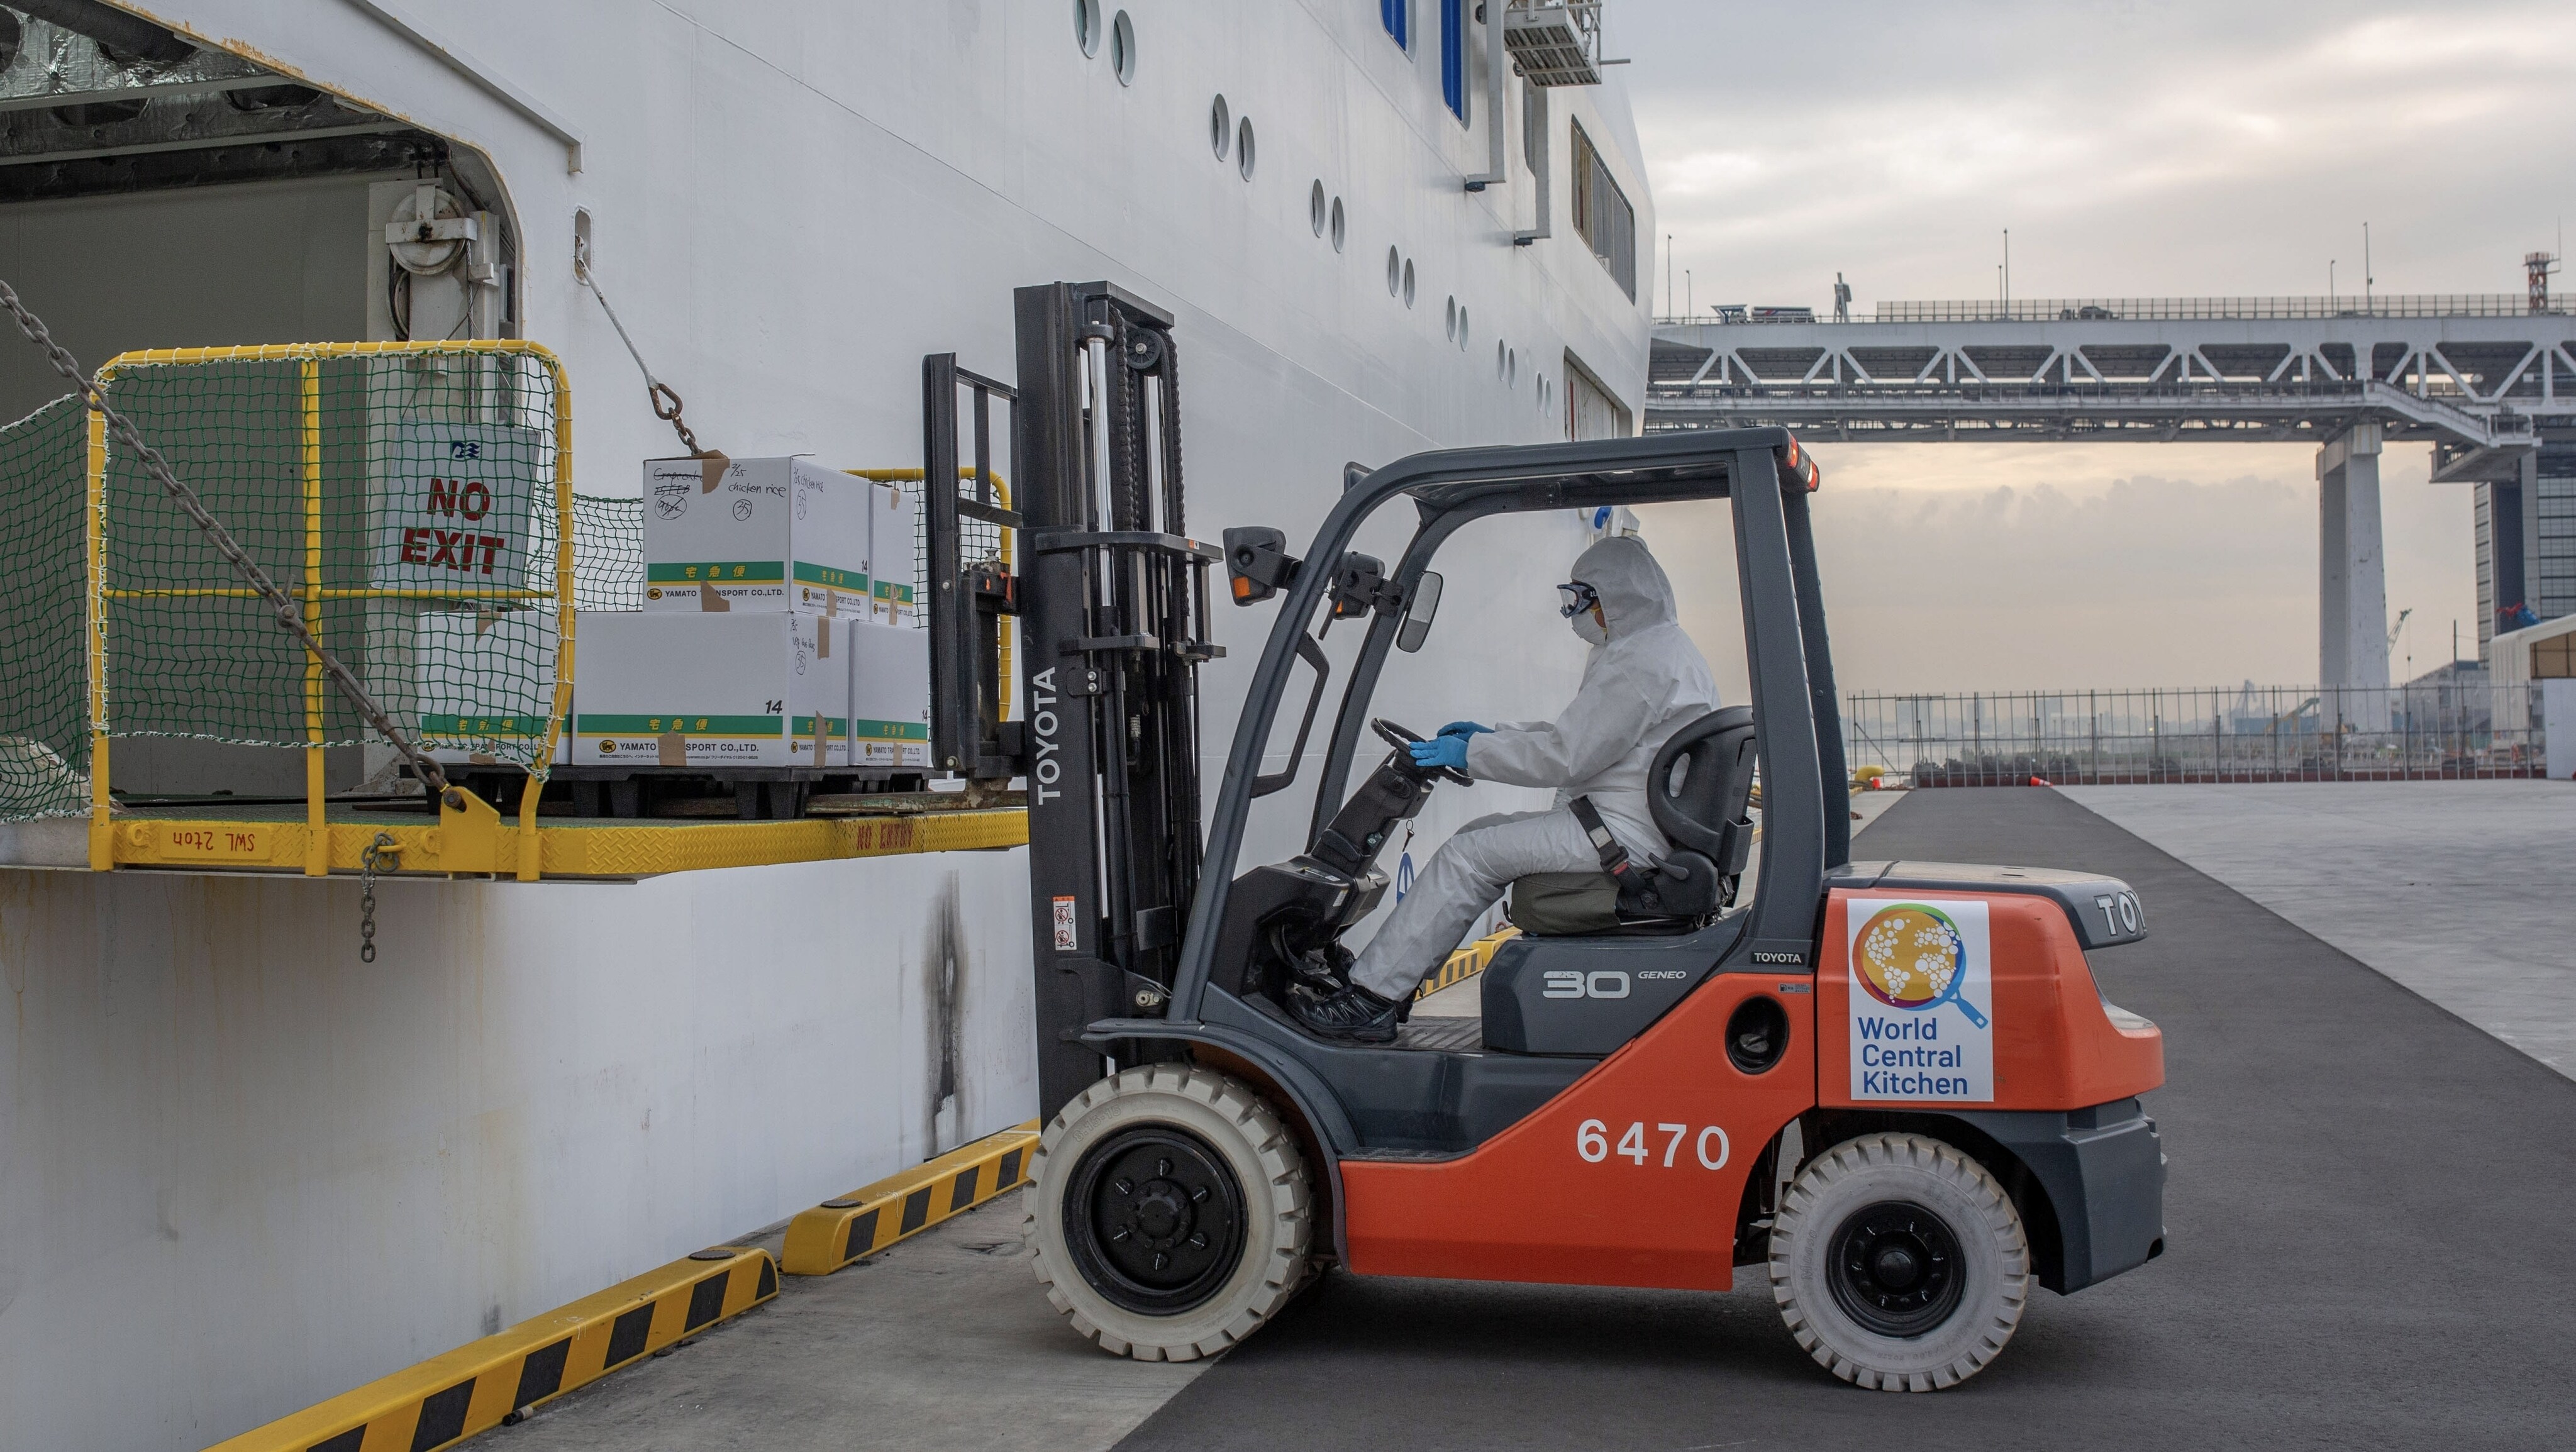 World Central Kitchen team member in full hazmat suit shuttles meals on forklift to quarantined travelers on the Diamond Princess cruise ship. (Credit: National Geographic/Clara Wetzel)